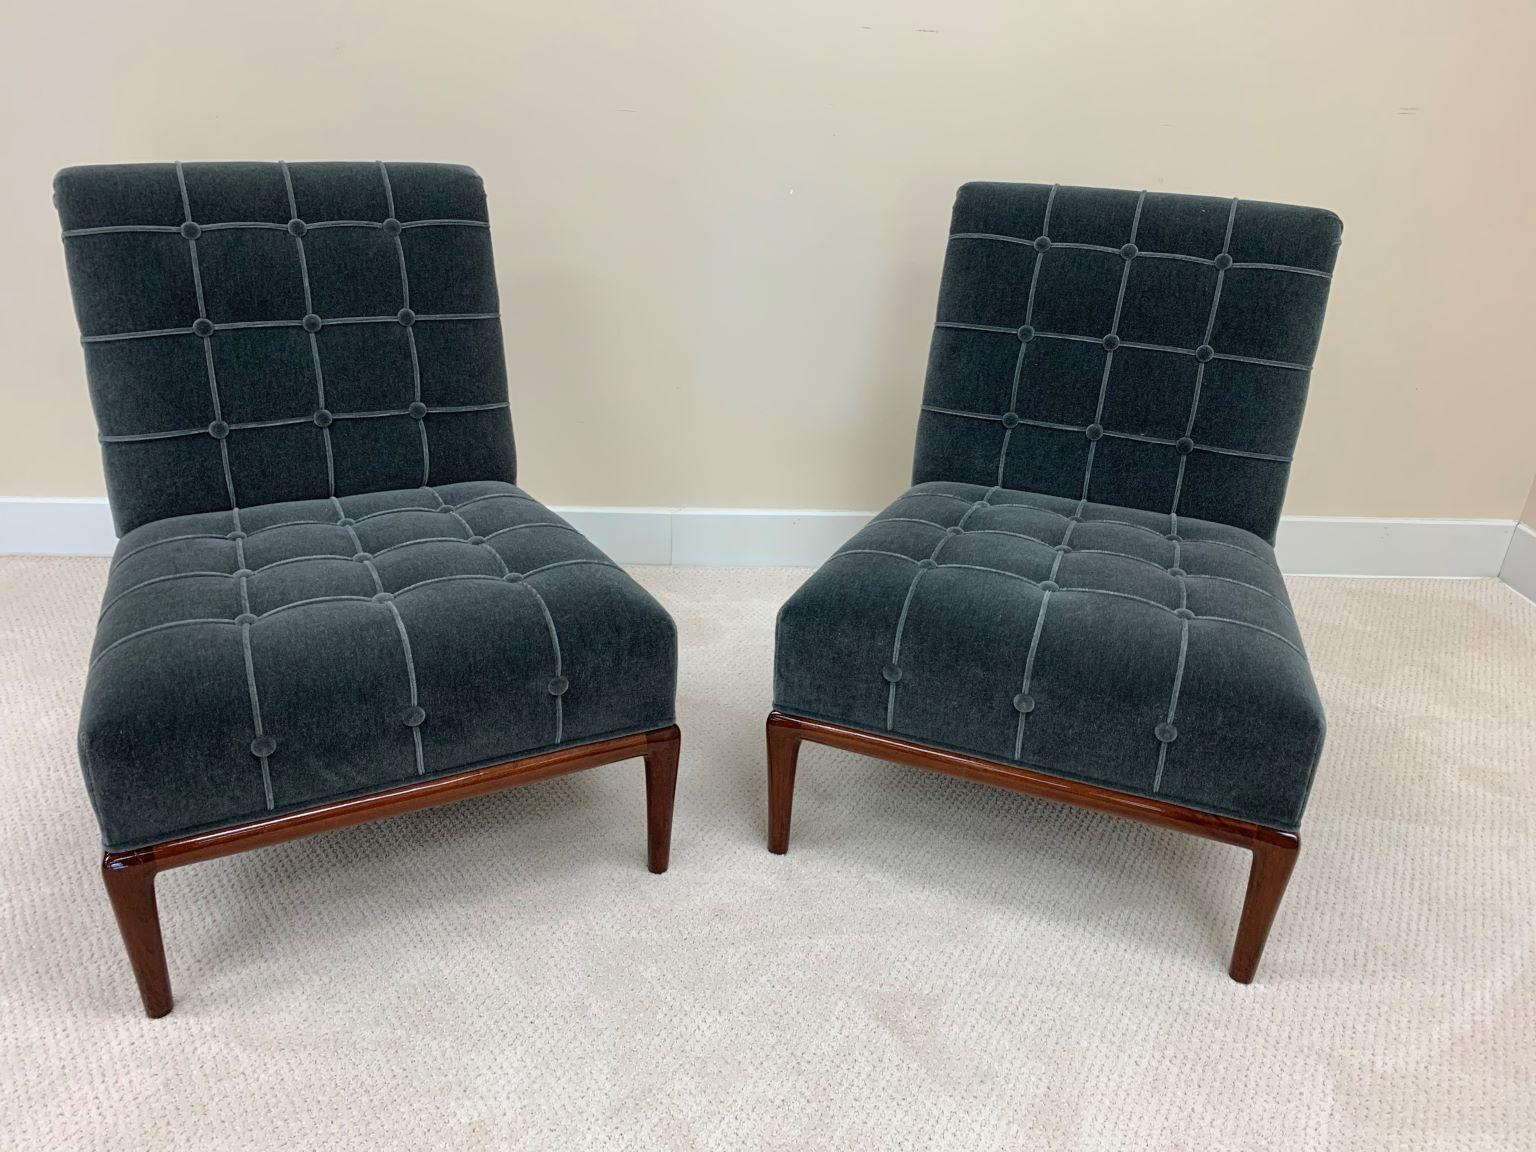 Pair of mid century chairs in the style of T.H. Robsjohn-Gibbings in mohair. Beautiful chairs in a walnut gloss finished, complemented in a soft luxurious gray mohair with a tailored and tuffed look upholstery. Professionally restored. Height 33